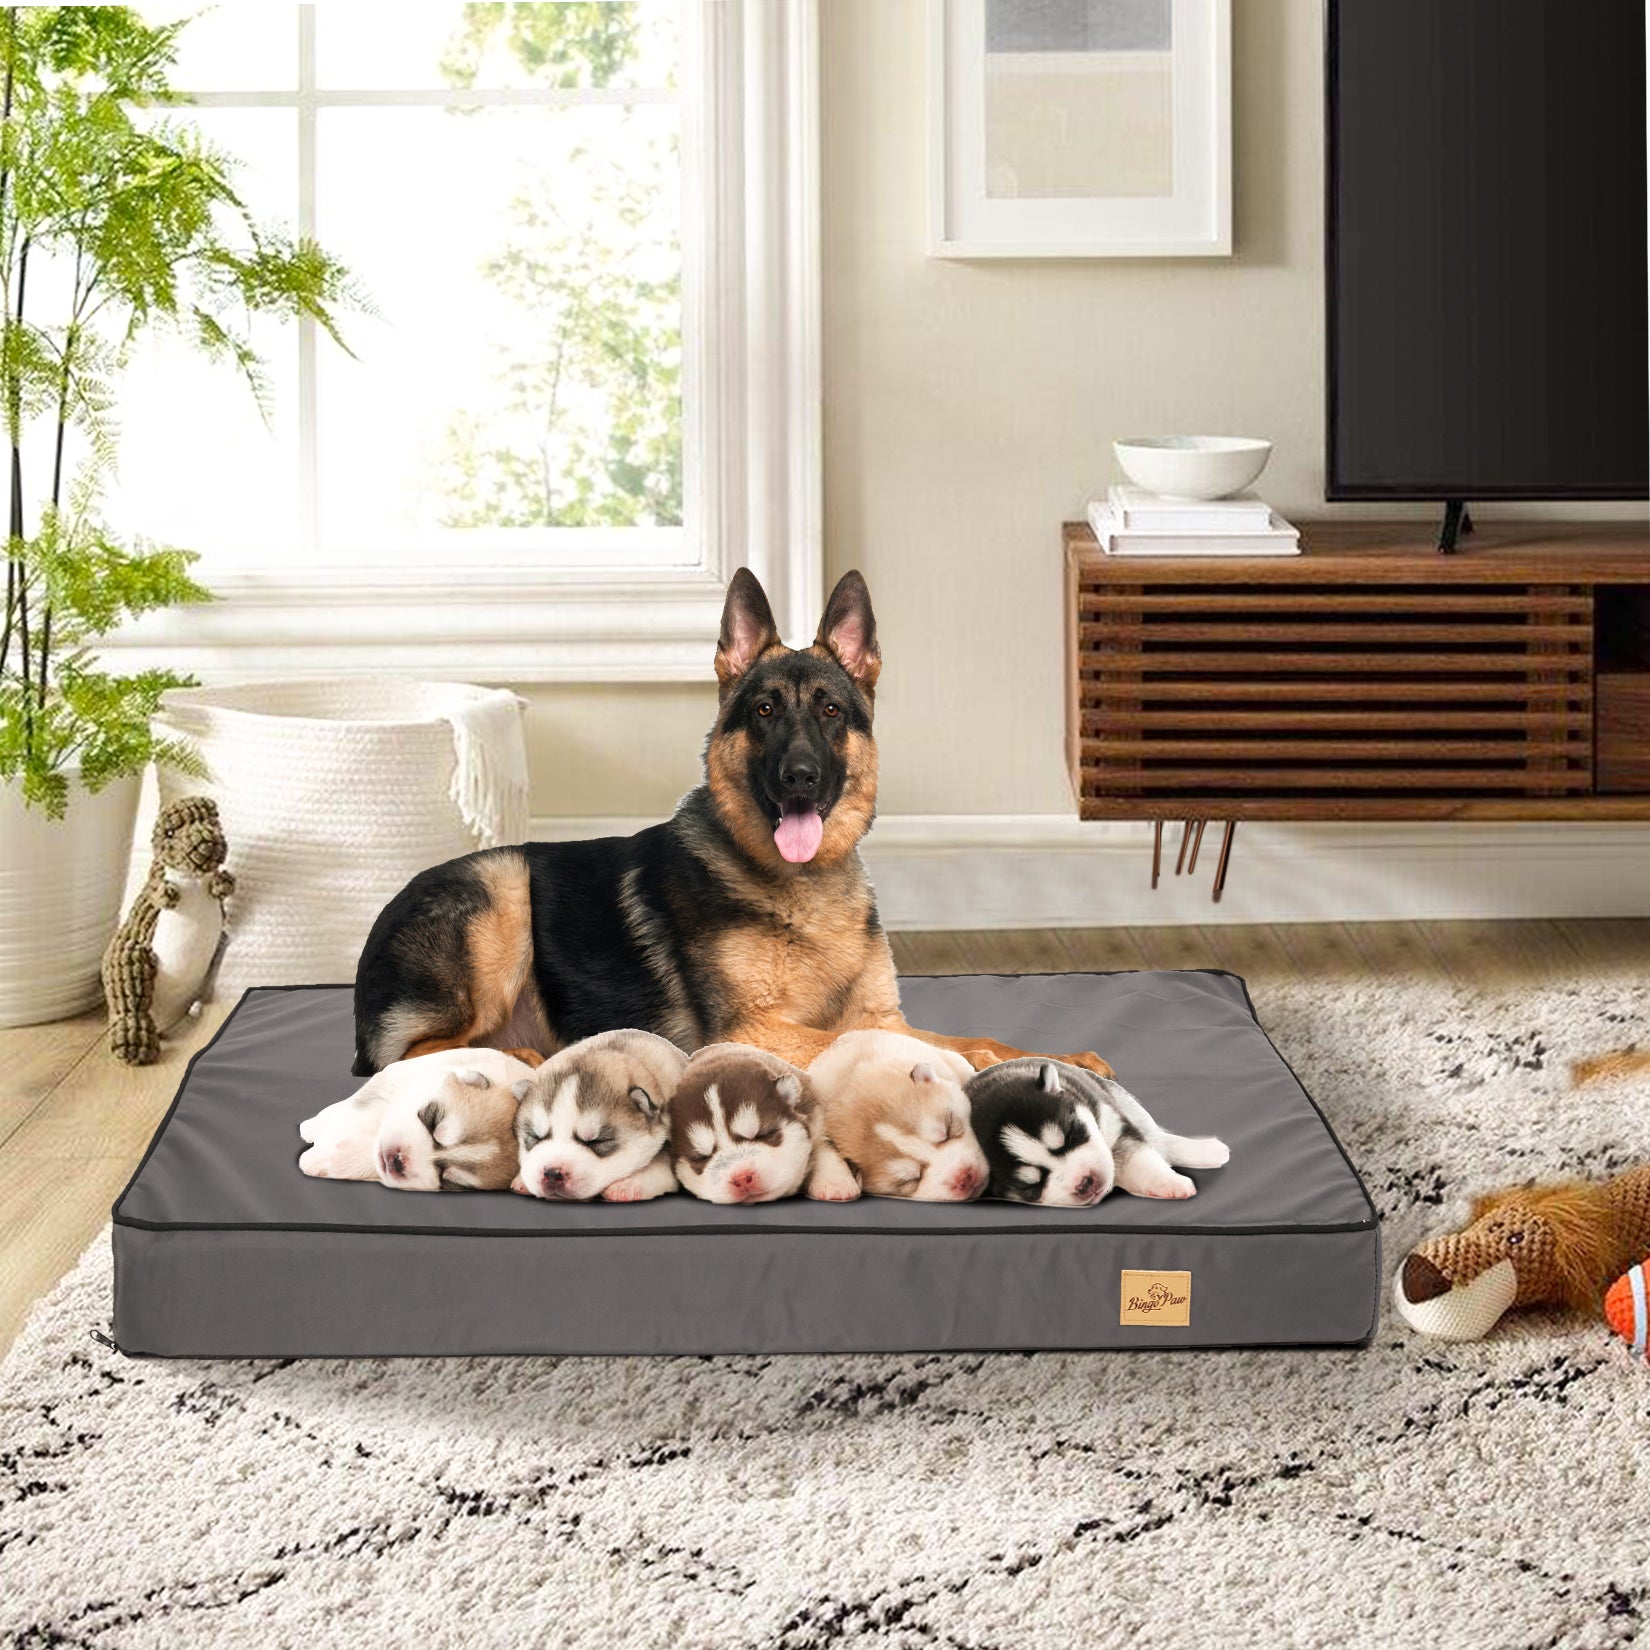 Large Dog Bed XL, Washable Pet Bed Dog Crate Pad for Extra Large